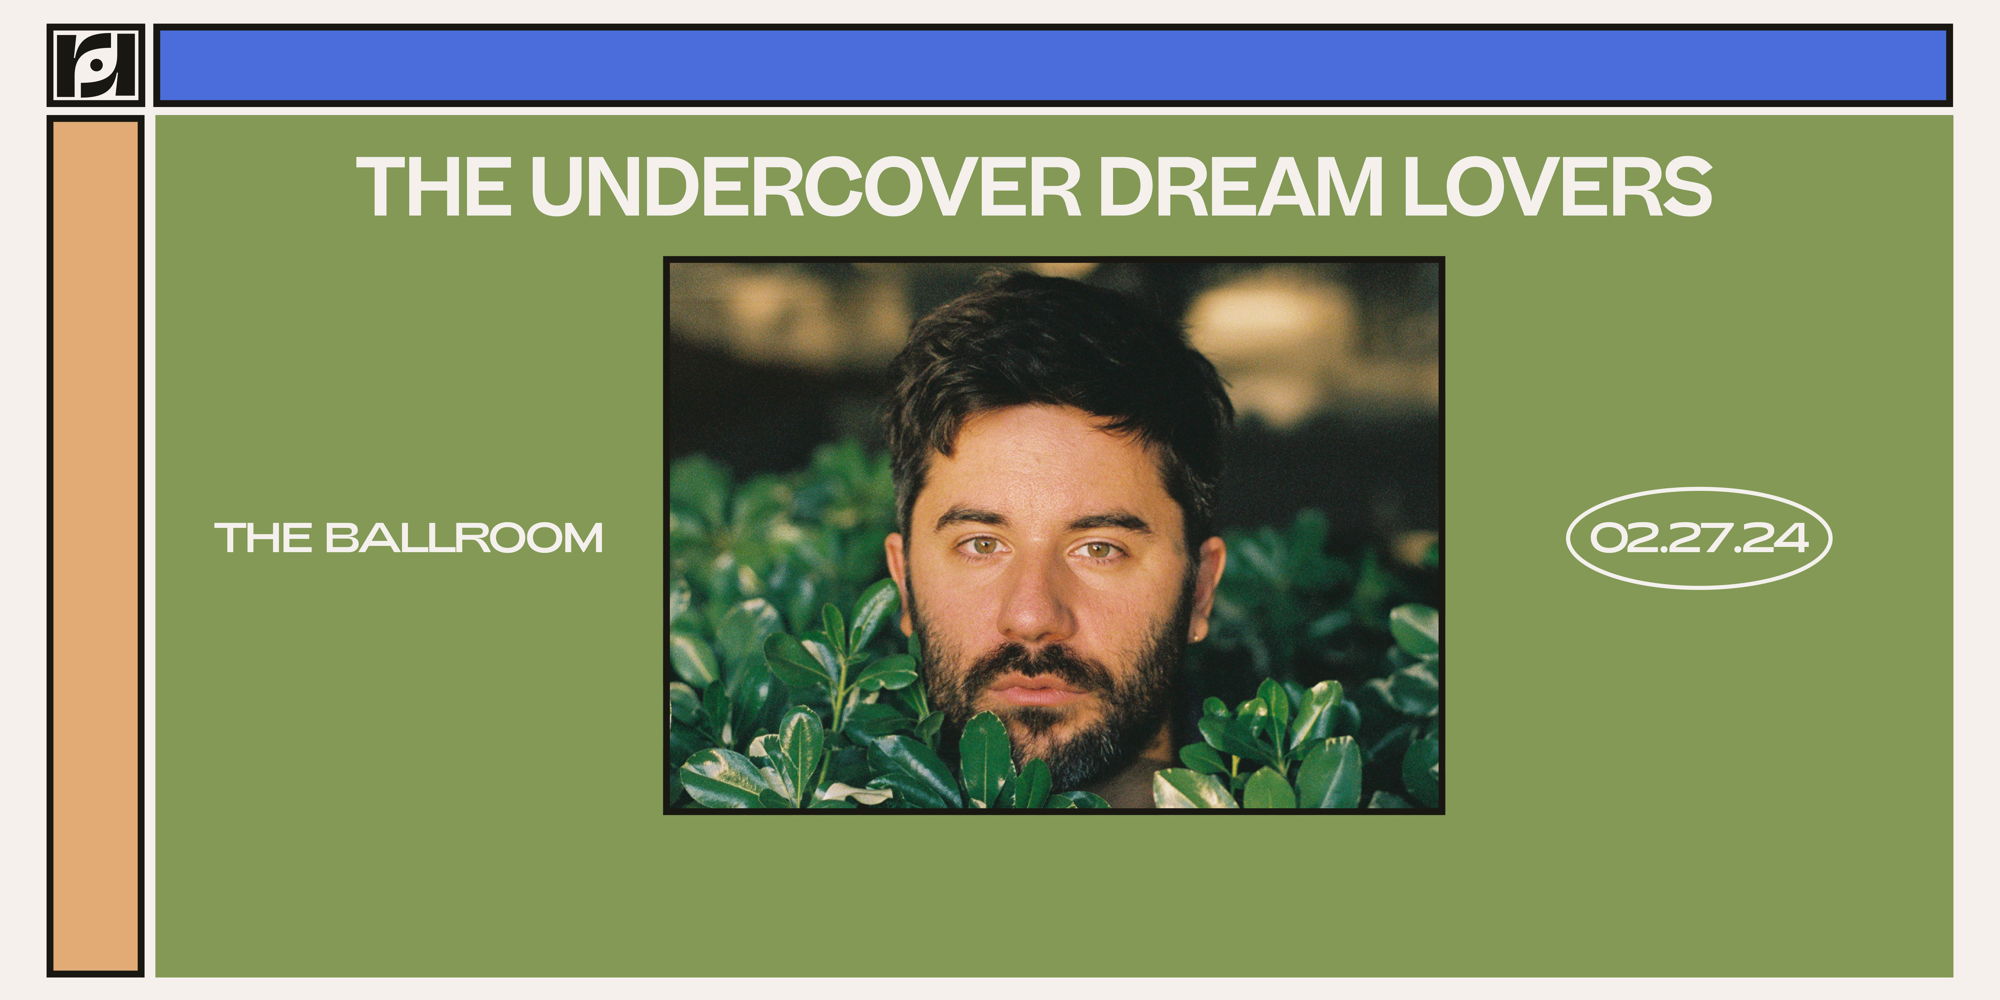 Resound Presents: The Undercover Dream Lovers - Timelapsed Tour at The Ballroom on 2/27 promotional image